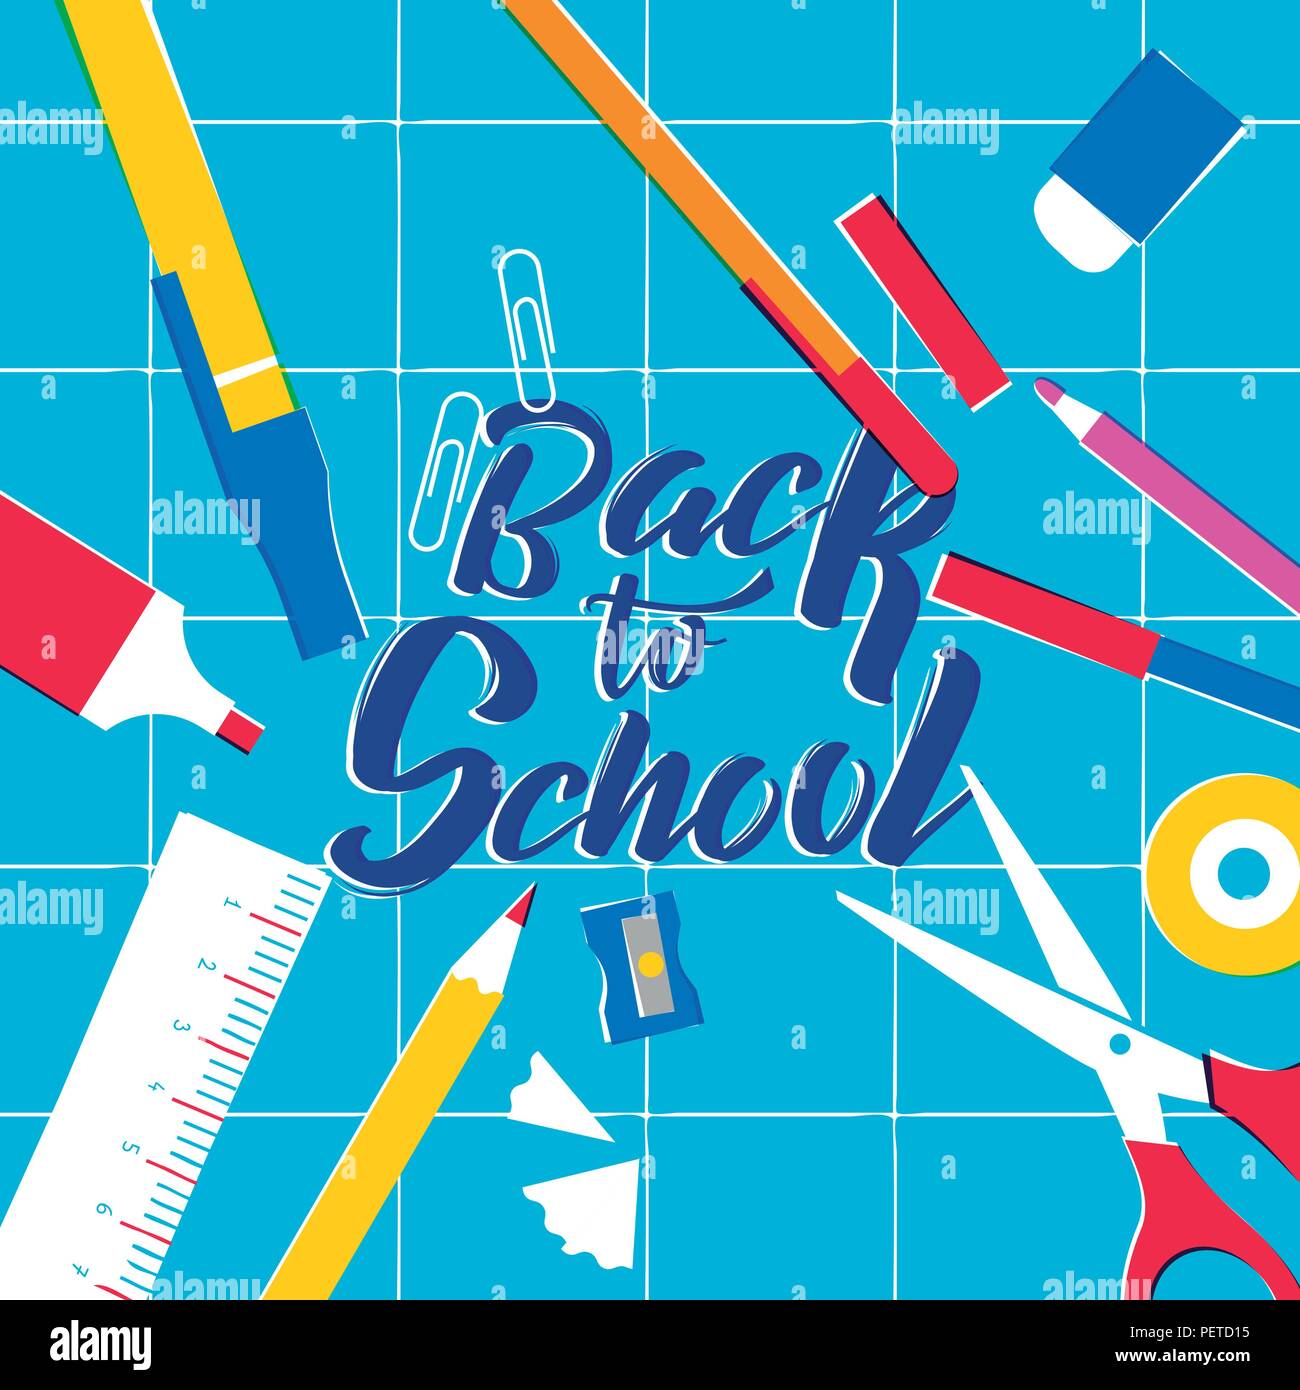 https://c8.alamy.com/comp/PETD15/back-to-school-illustration-colorful-classroom-supplies-on-study-table-includes-pencil-ruler-eraser-paper-clip-and-more-eps10-vector-PETD15.jpg